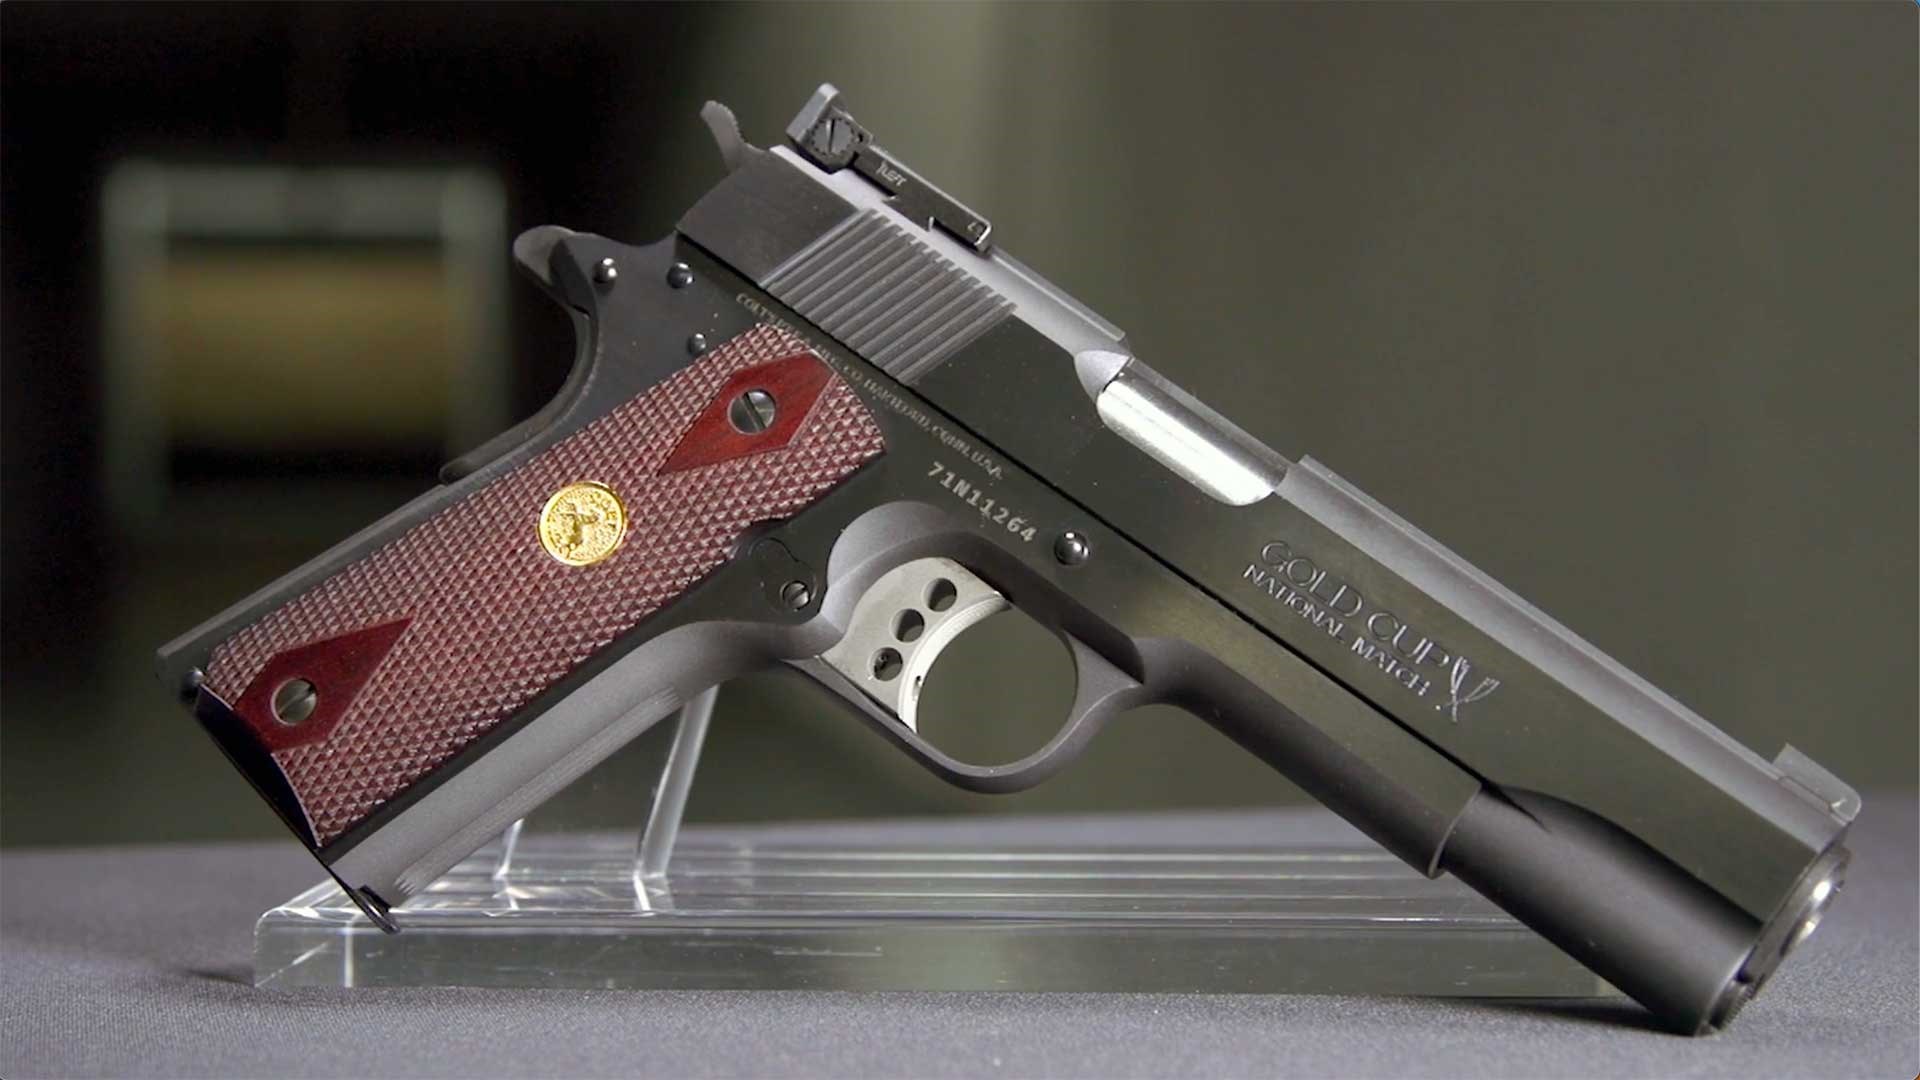 Right side of the Colt Gold Cup National Match M1911.